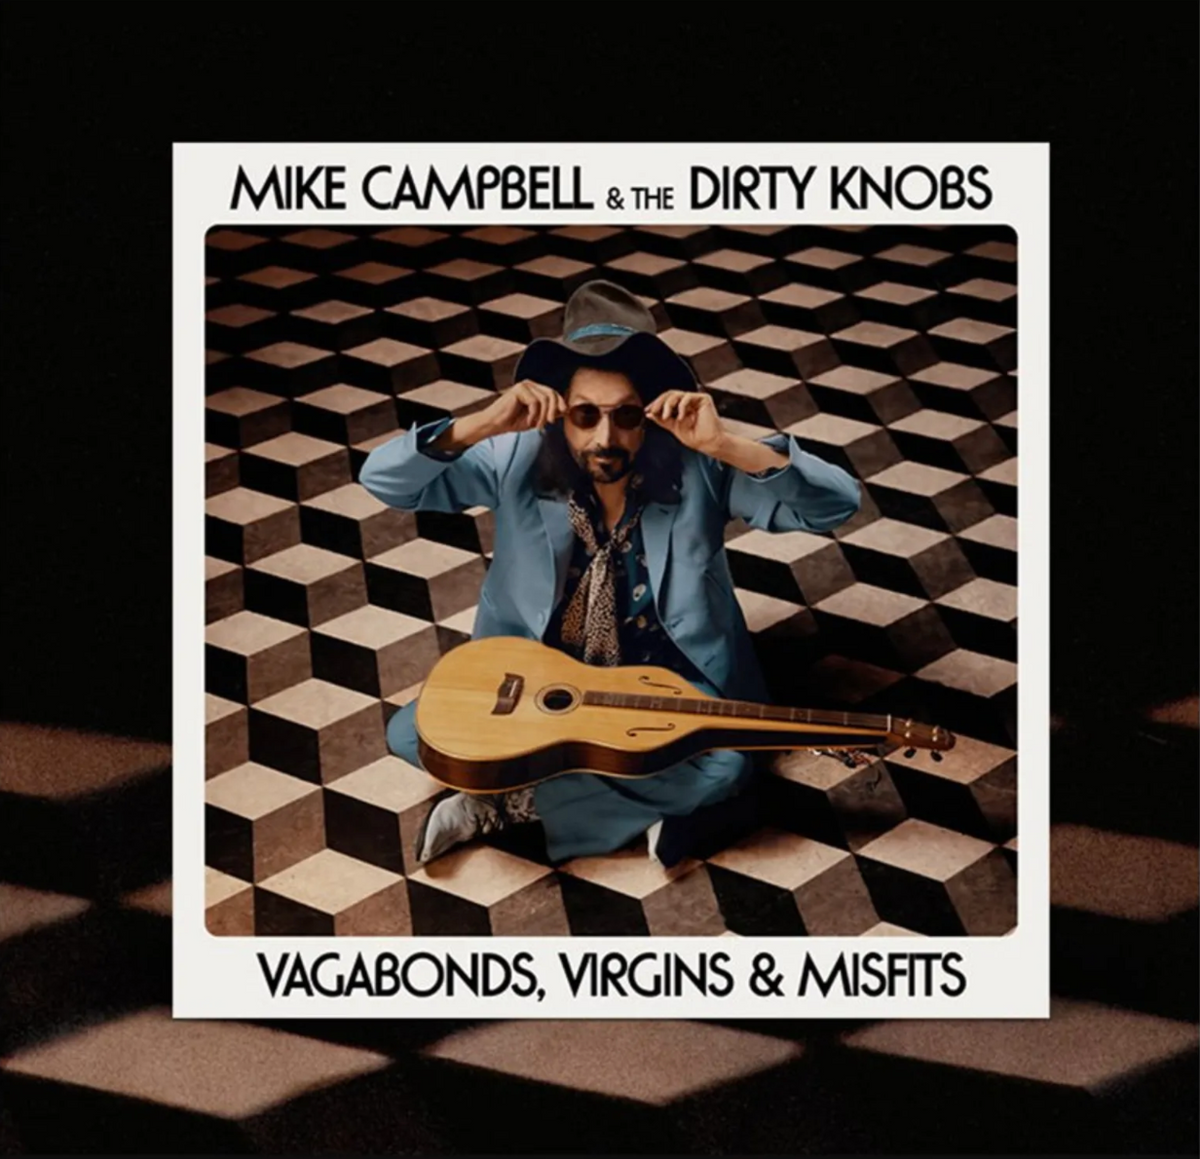 Mike Campbell & The Dirty Knobs Announce New Album & Single